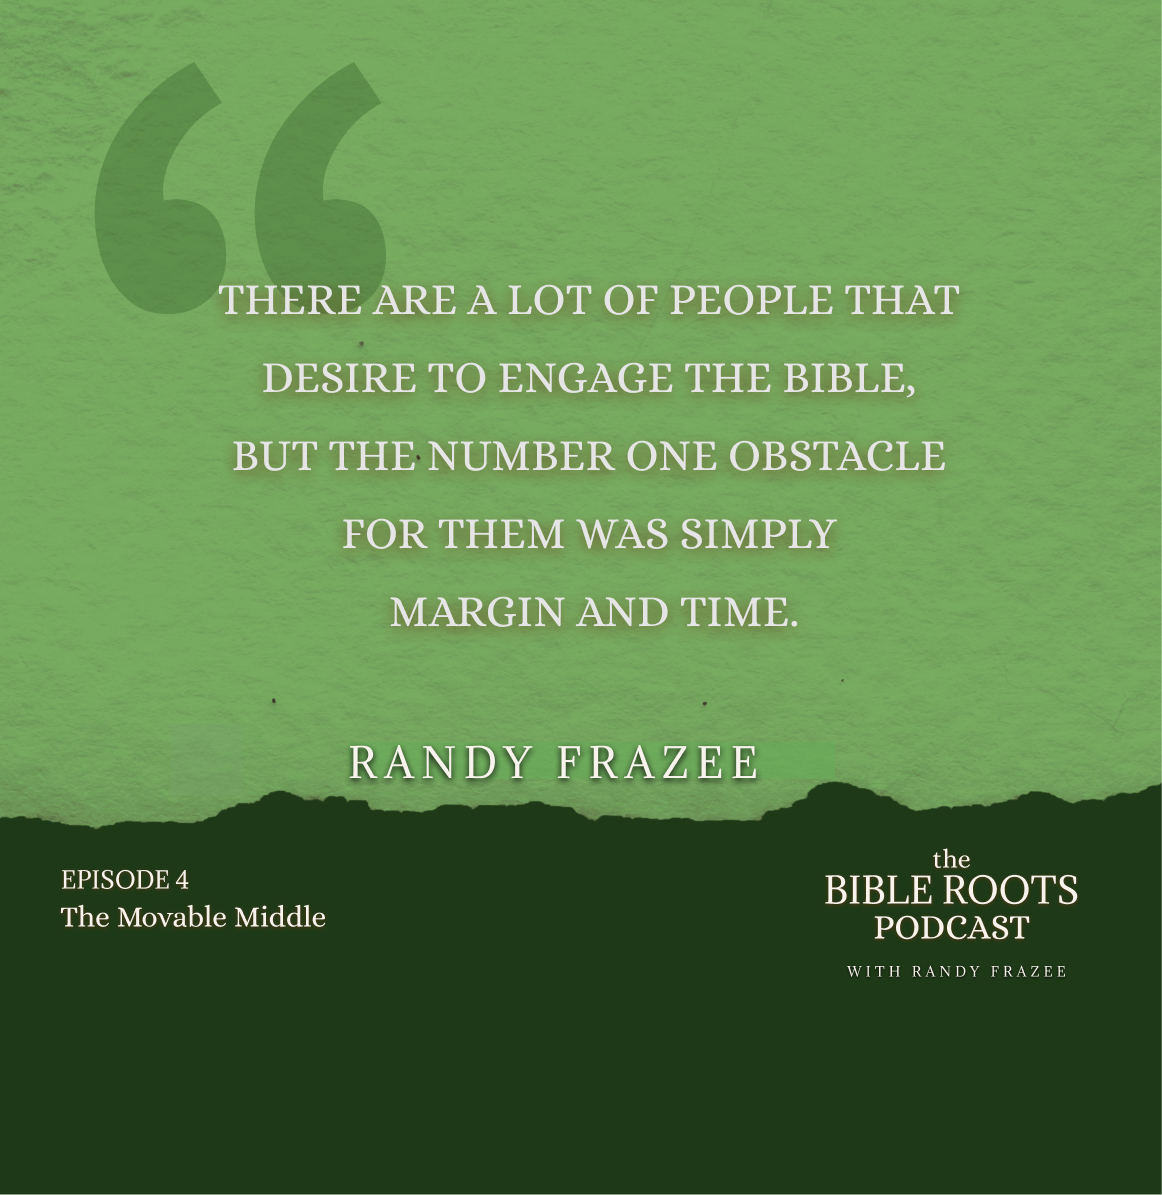 Randy Frazee quote "there are a lot of people that desire to engage the Bible, but the number one obstacle for them was simply margin and time."